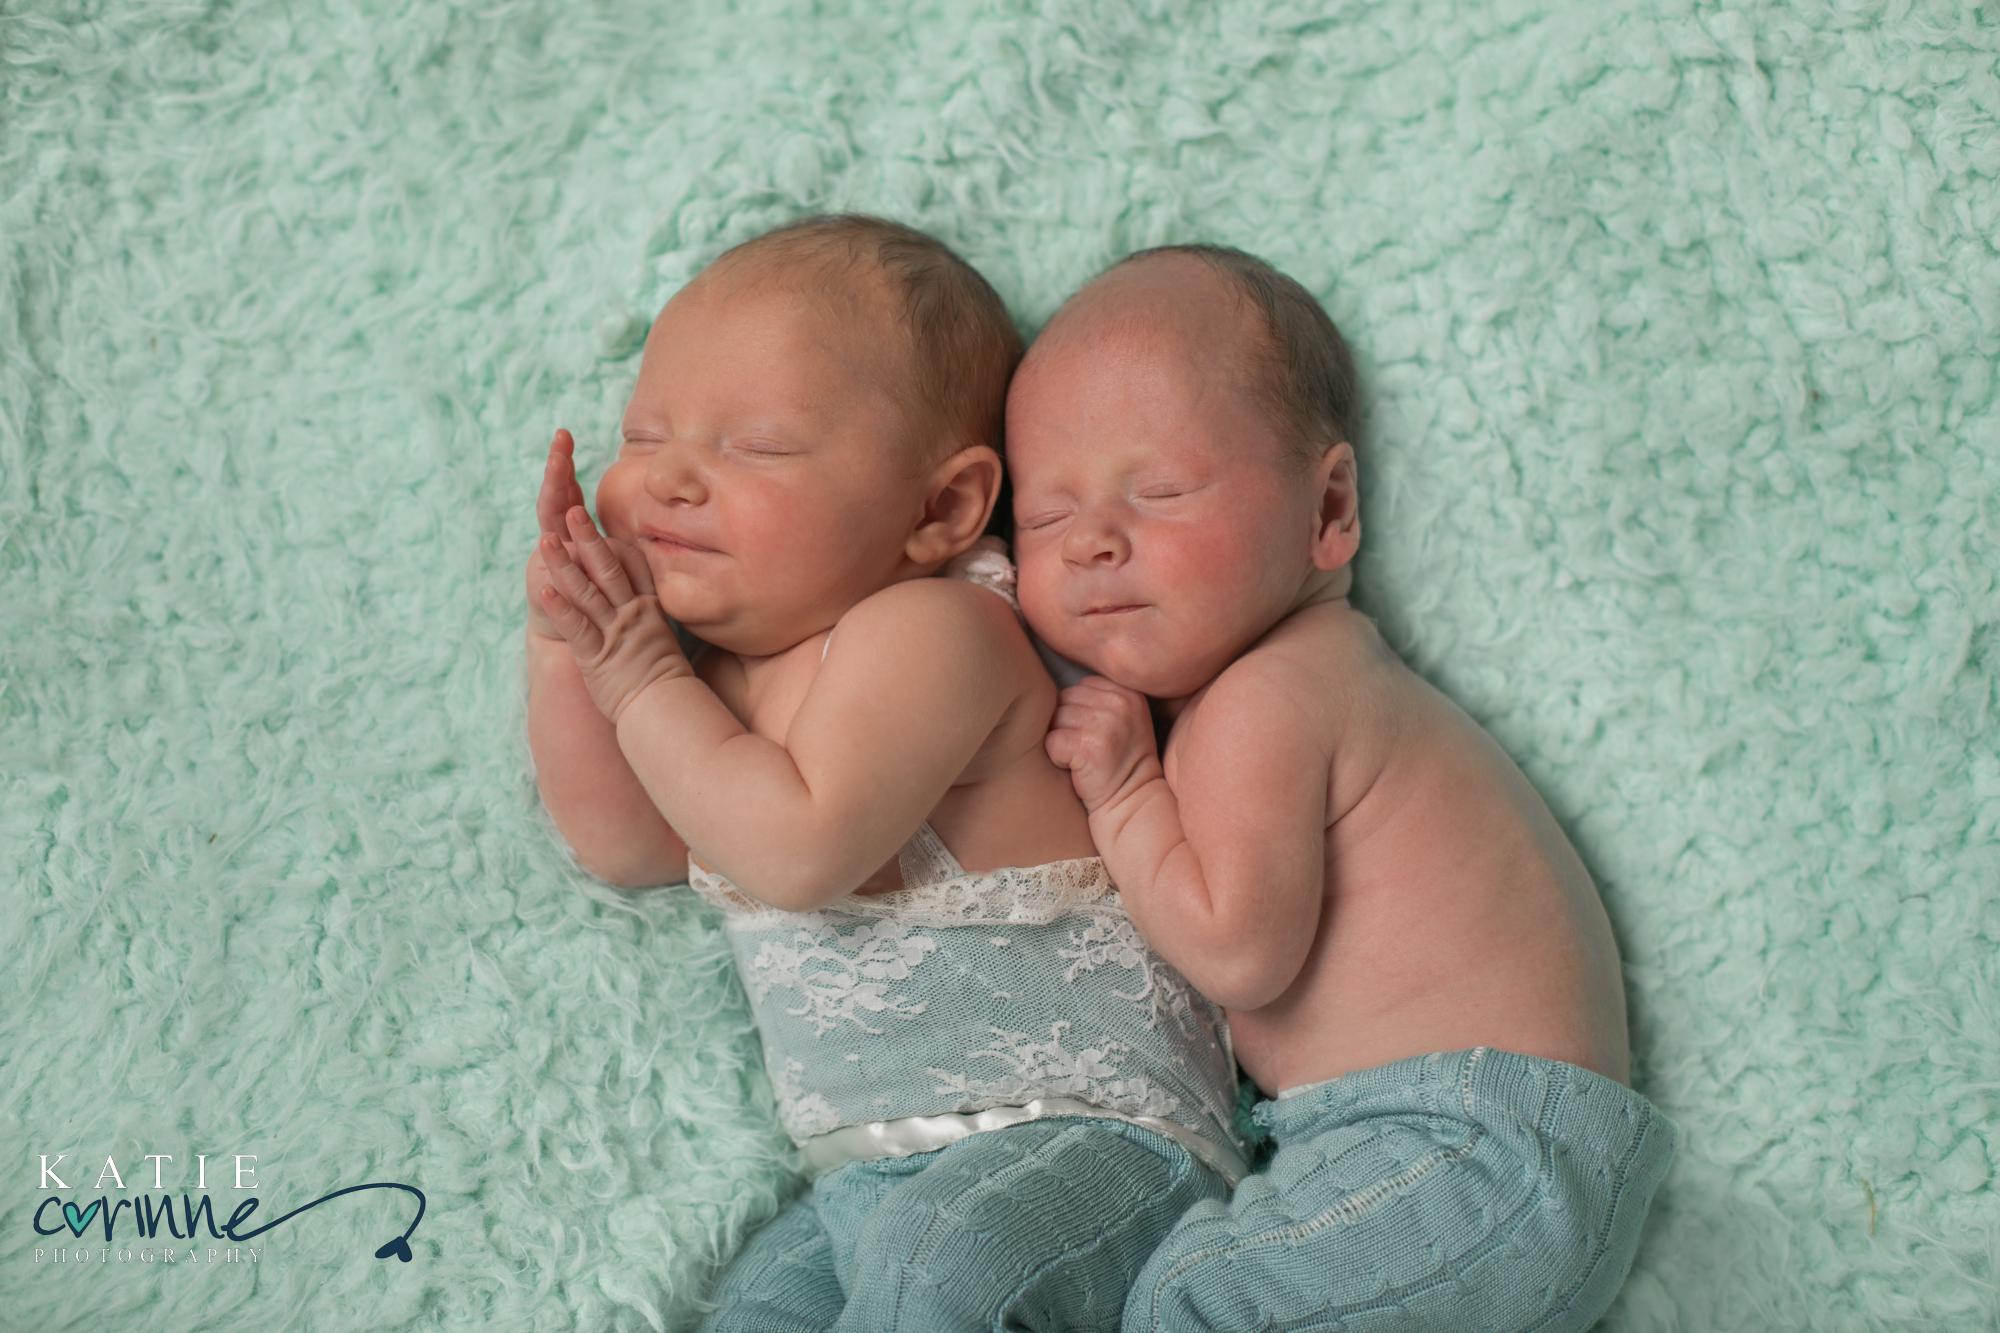 Monument fraternal twins in Colorado photo studio